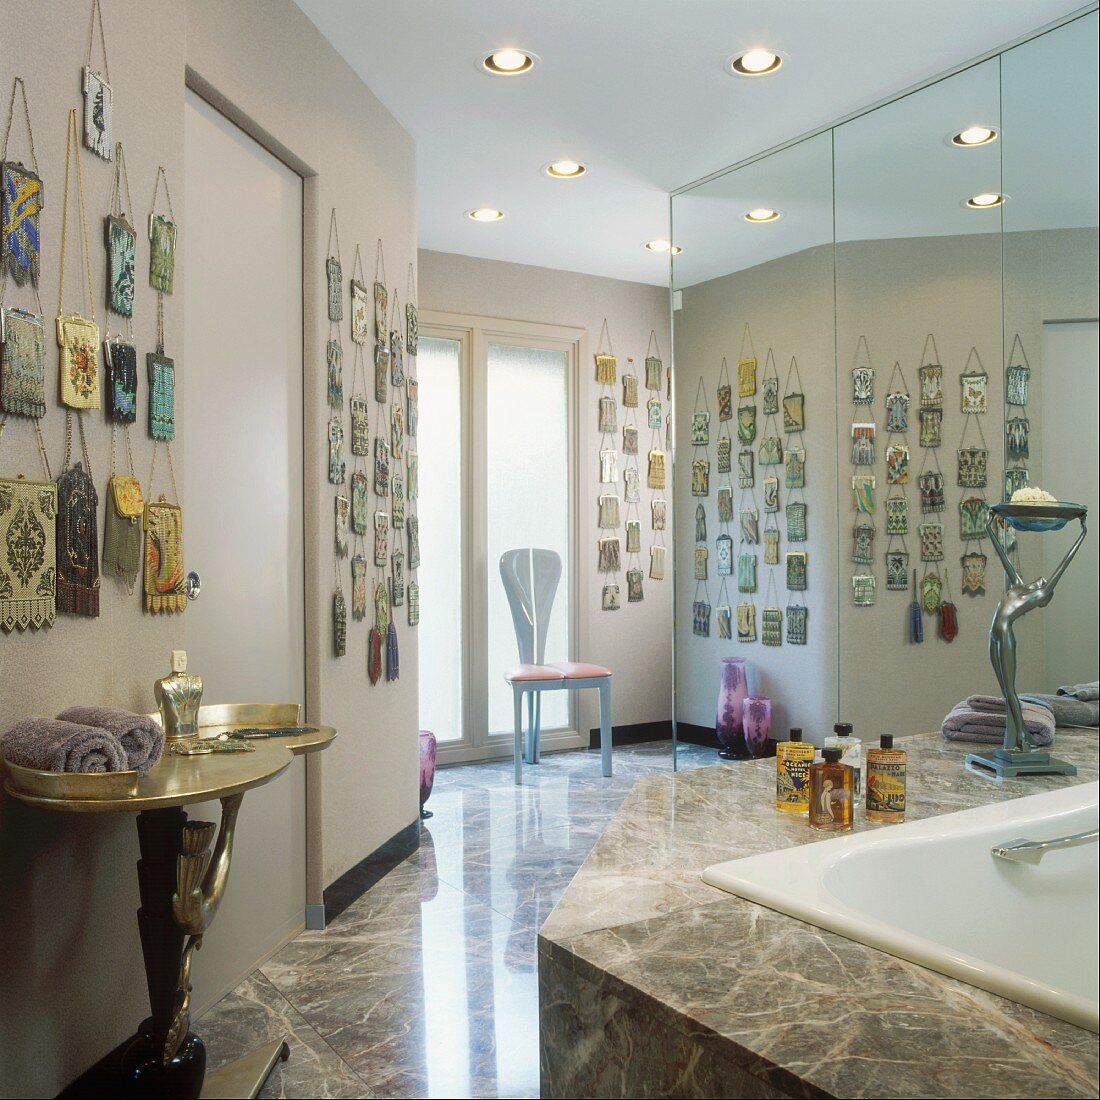 Large collection of handbags in modern bathroom with floor-to-ceiling mirrored cupboards